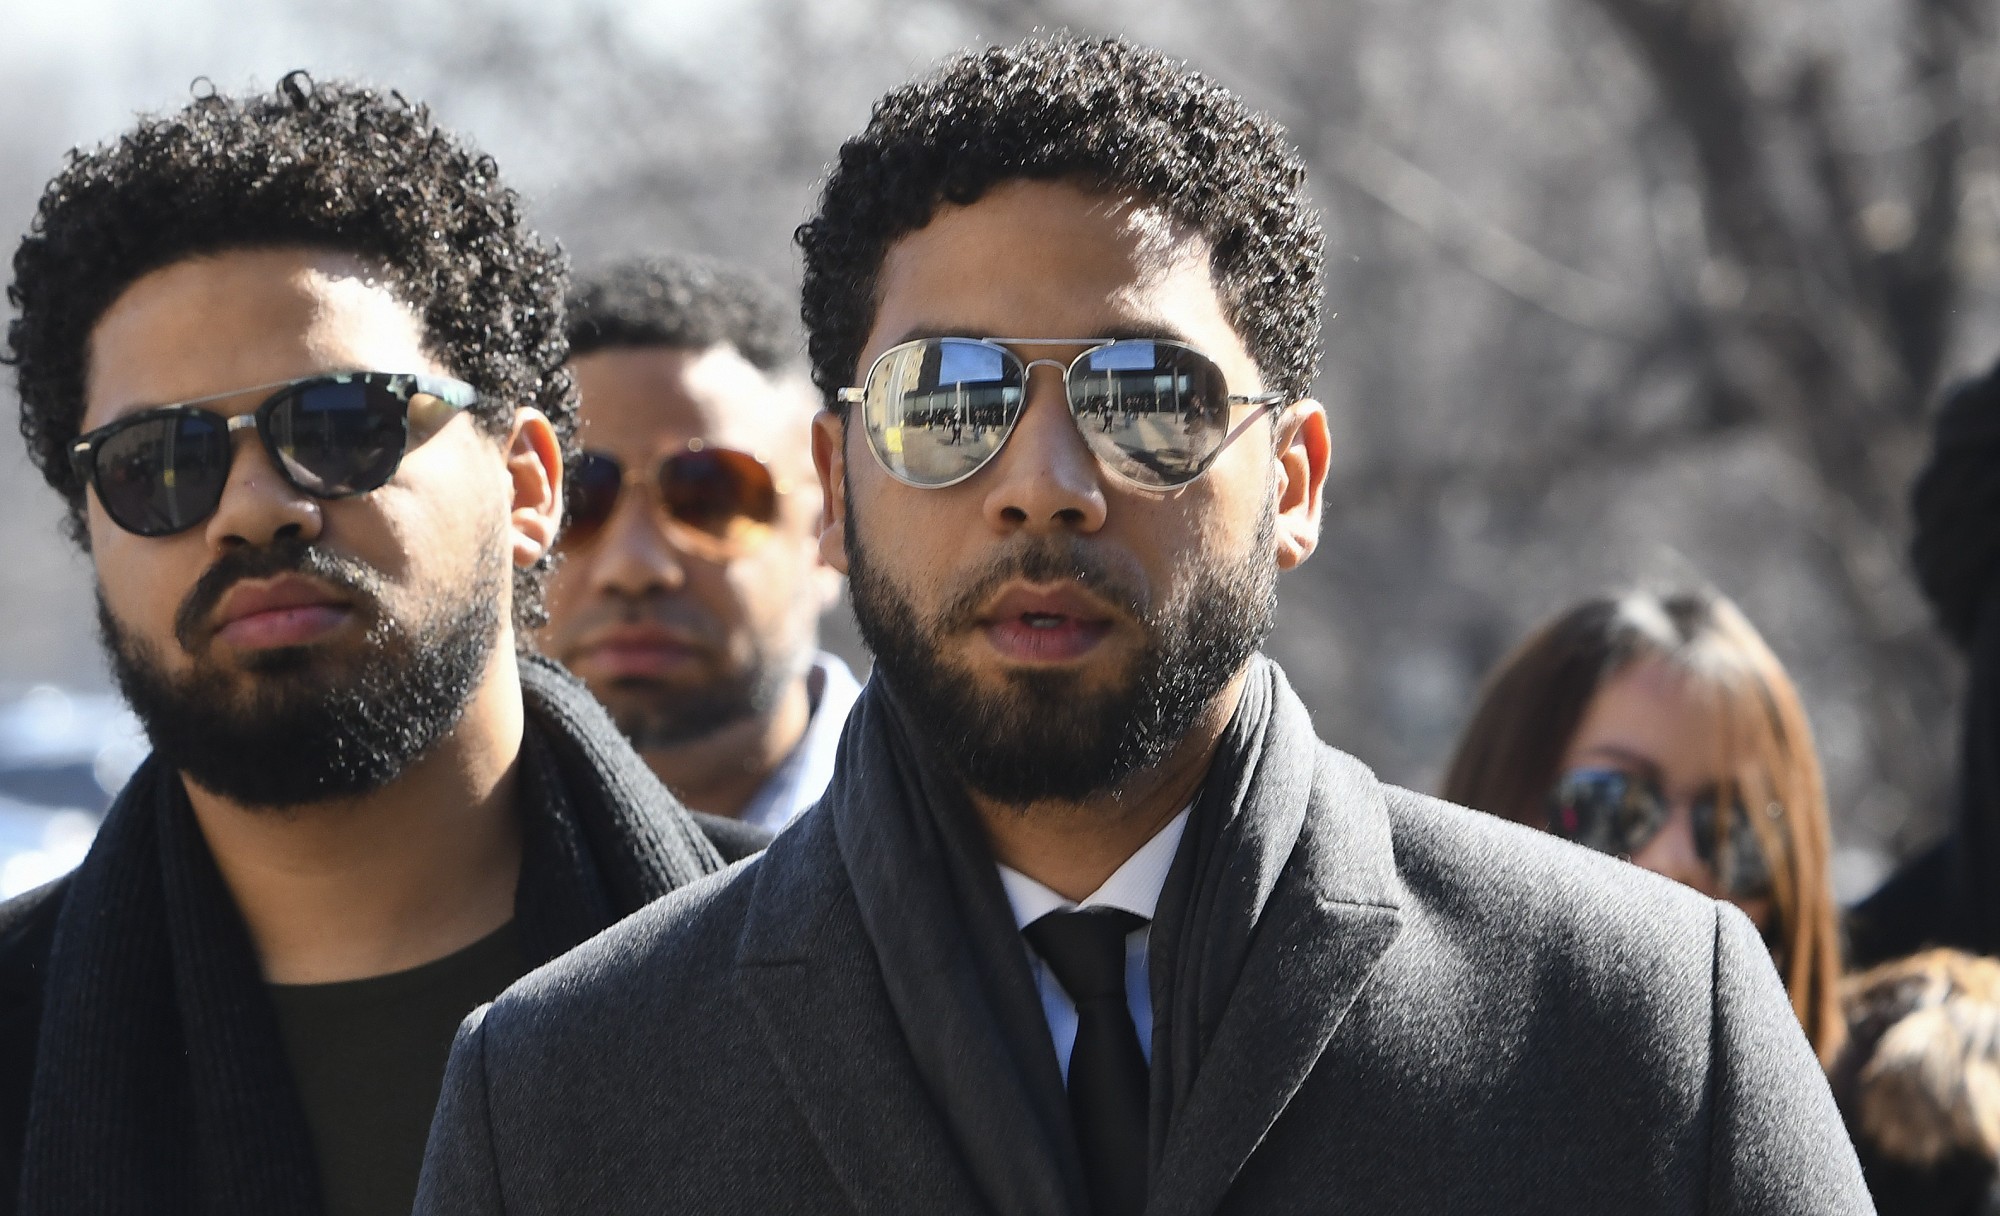 DC Police Use Of Force Increases, Chicago Police Release Reports Into Jussie Smollett ...2000 x 1216